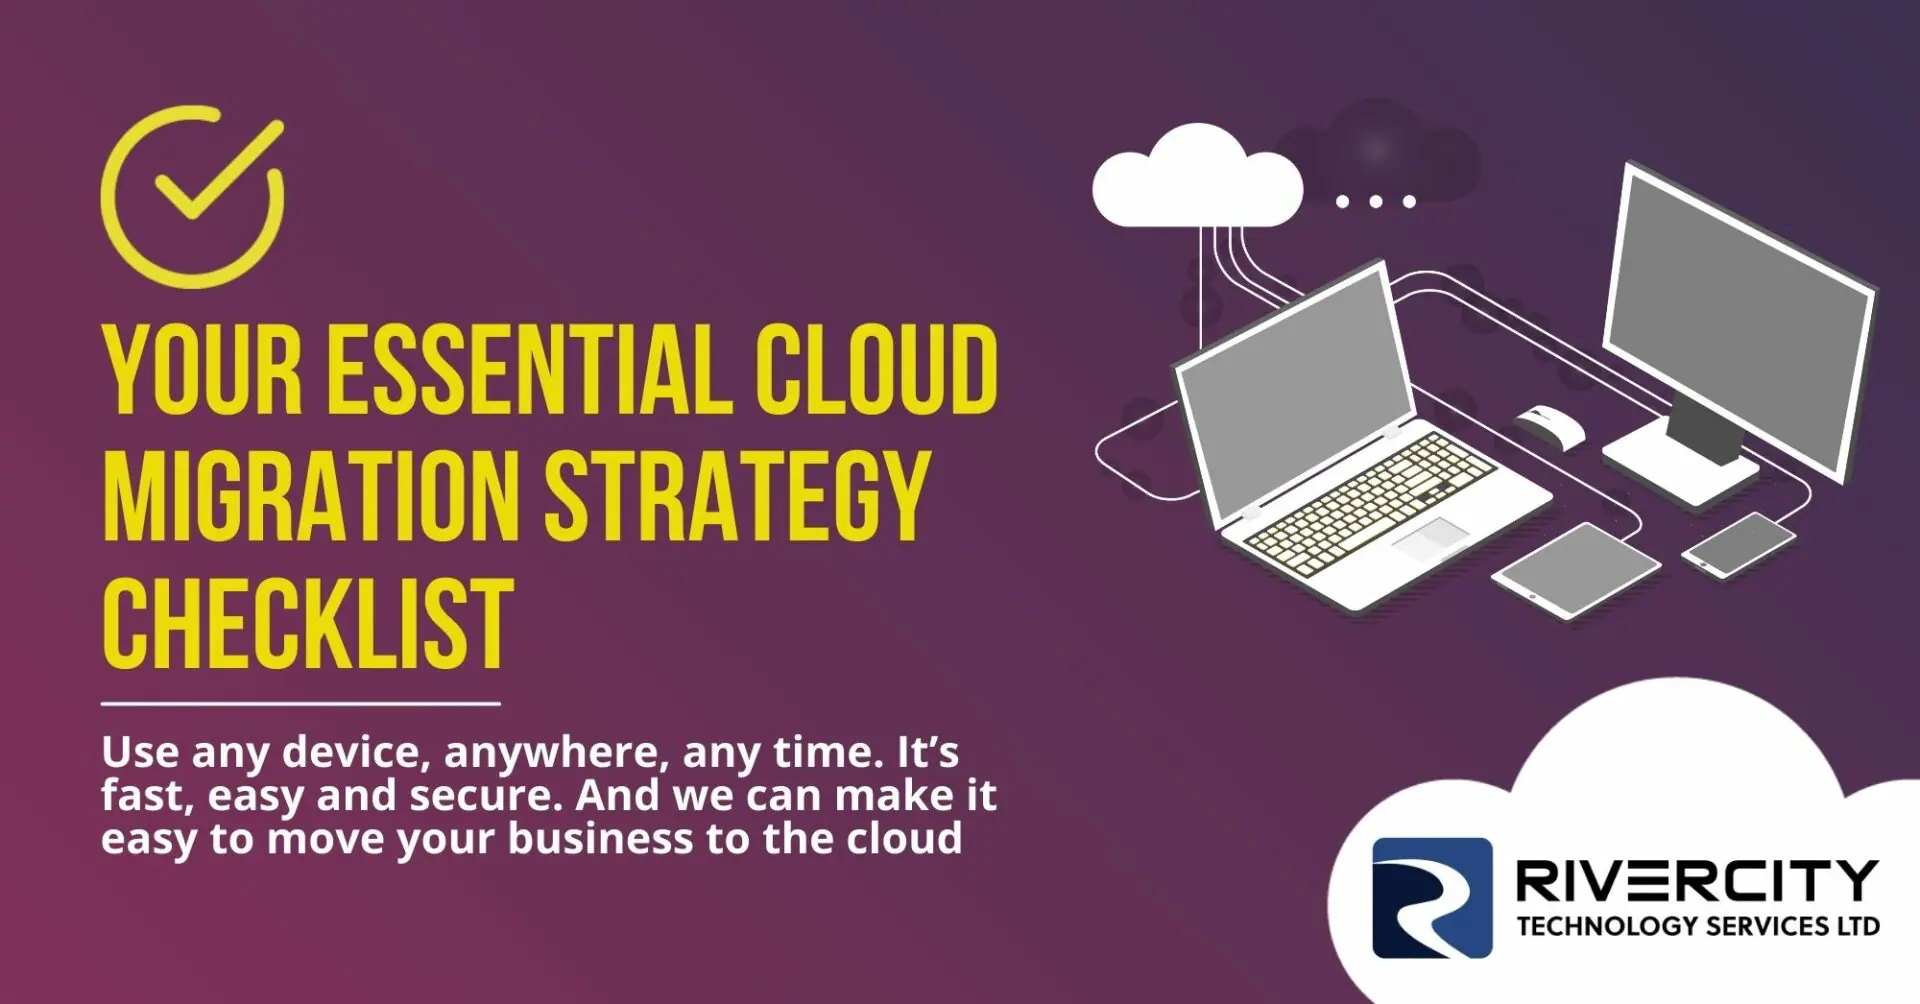 Graphic with the text "Your essential cloud migration strategy checklist"